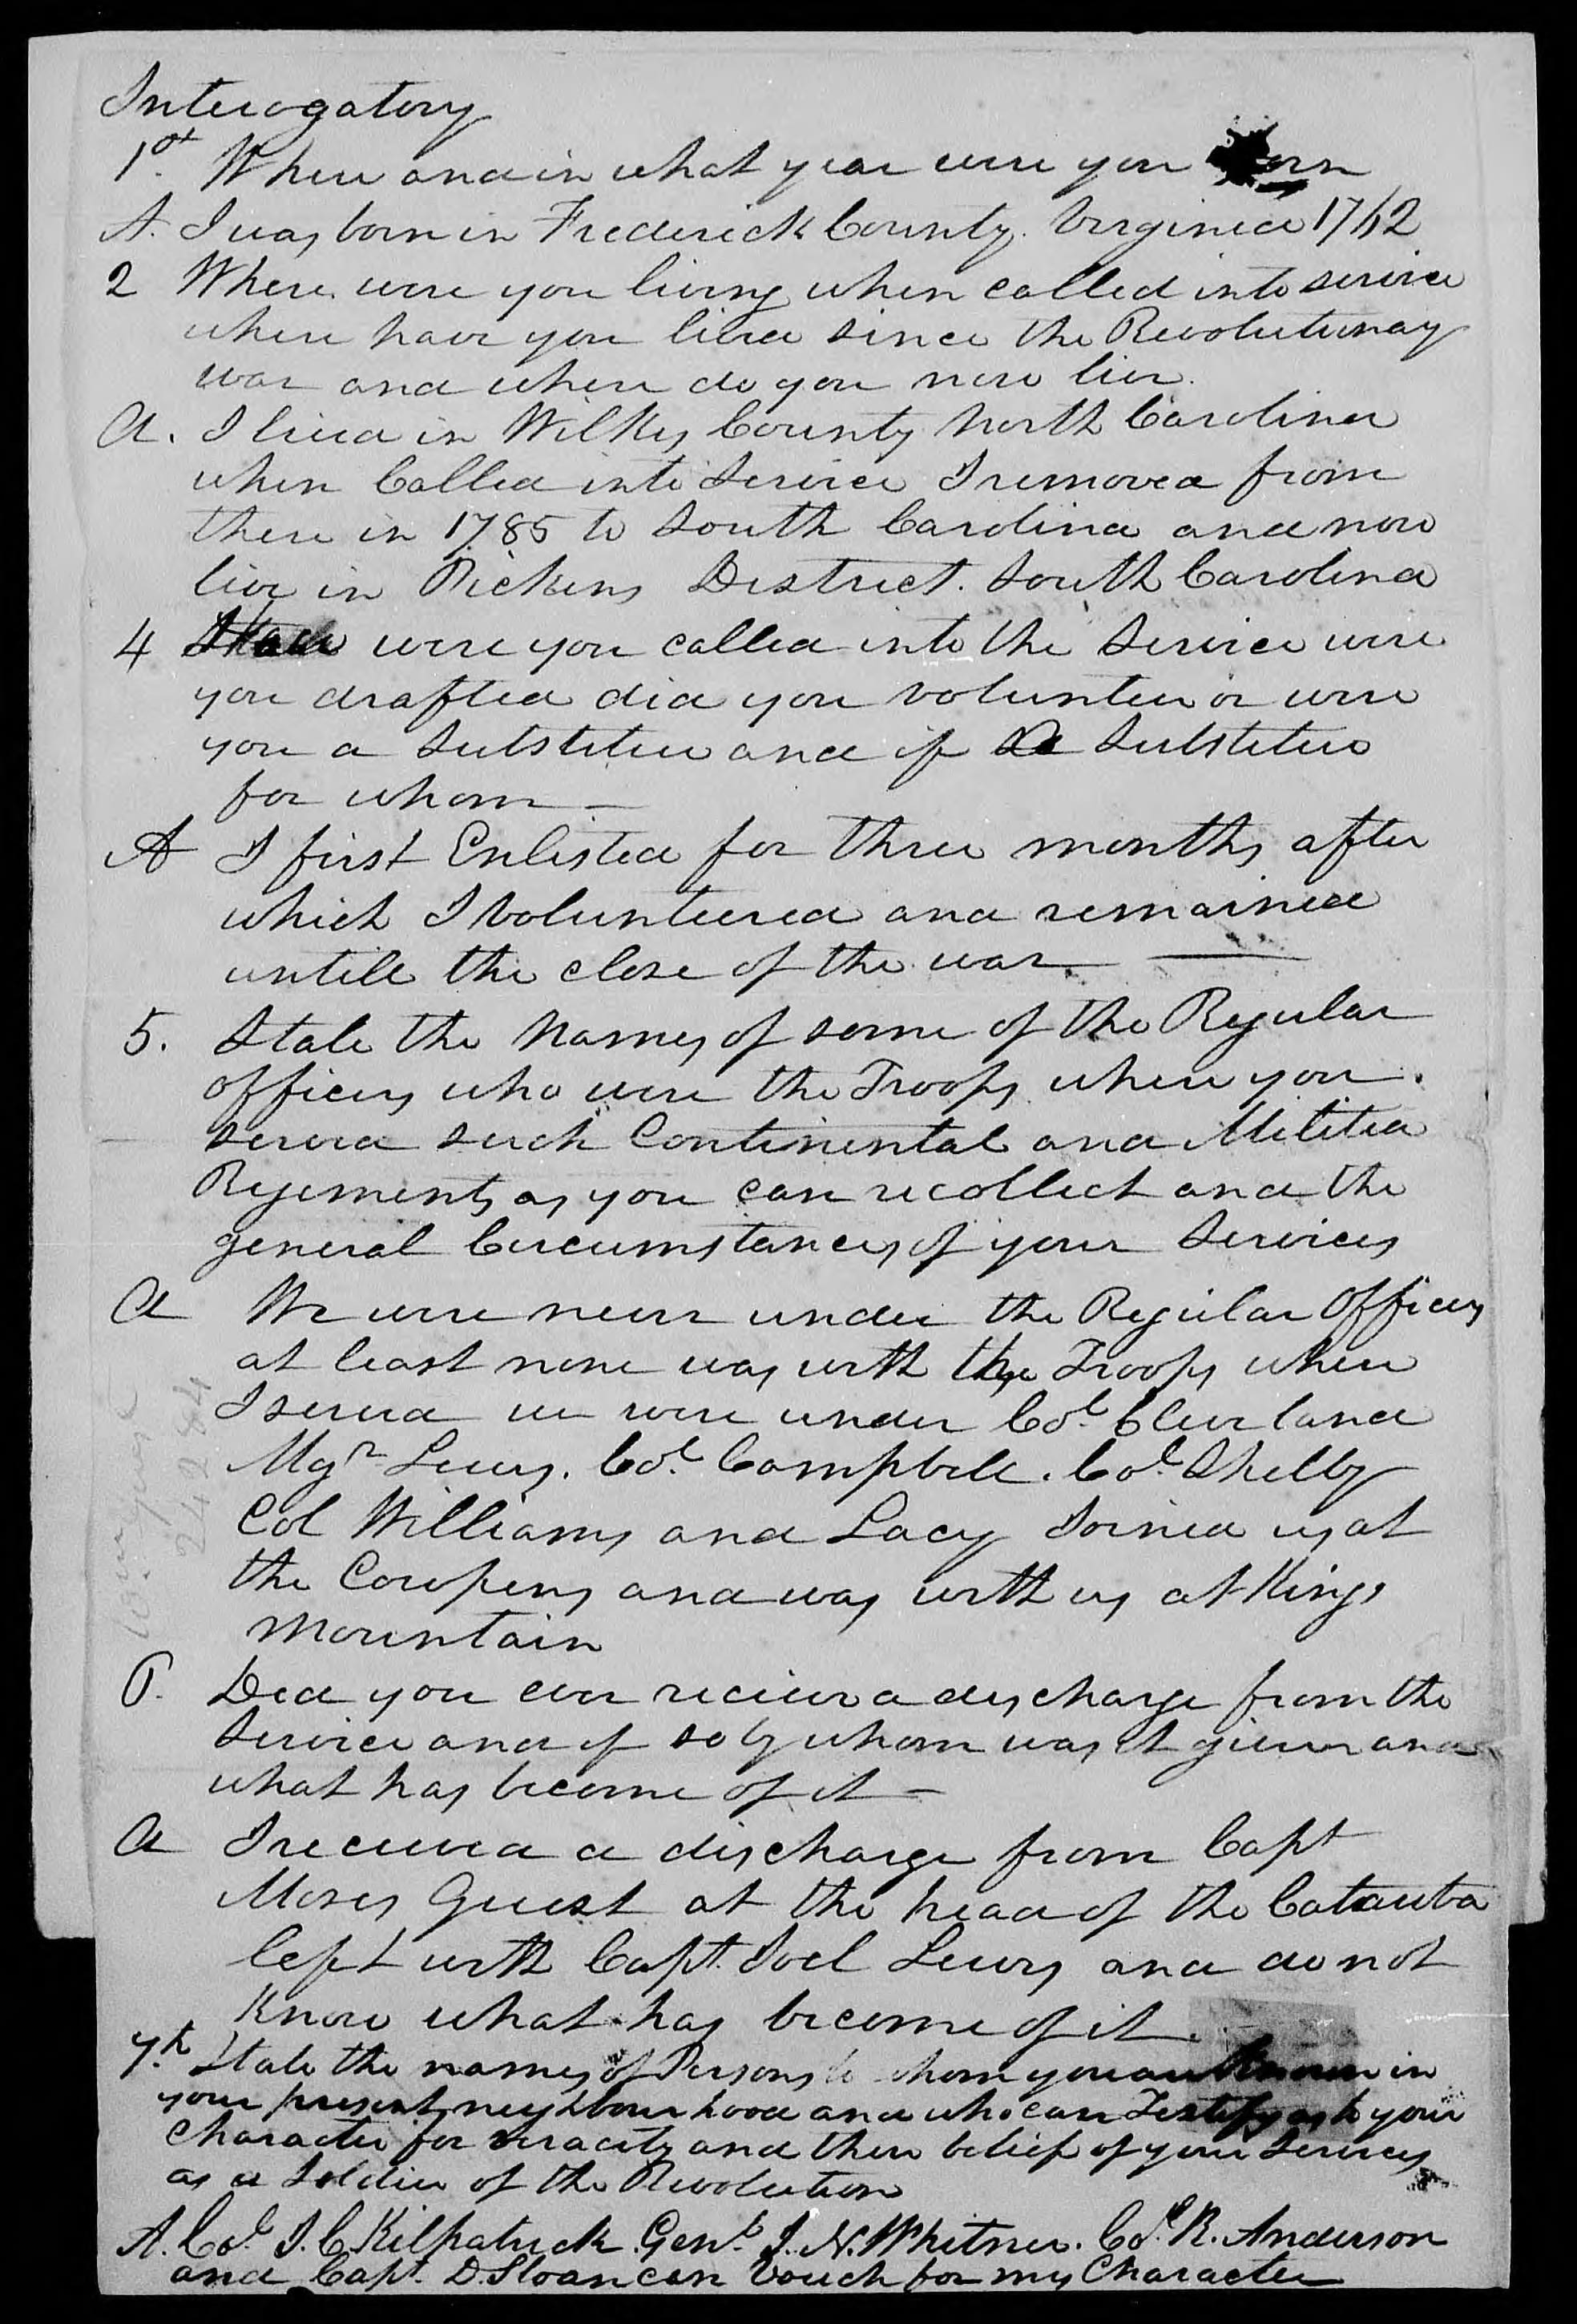 Interrogatories for the Pension Claim of William Guest, circa 11 March 1833